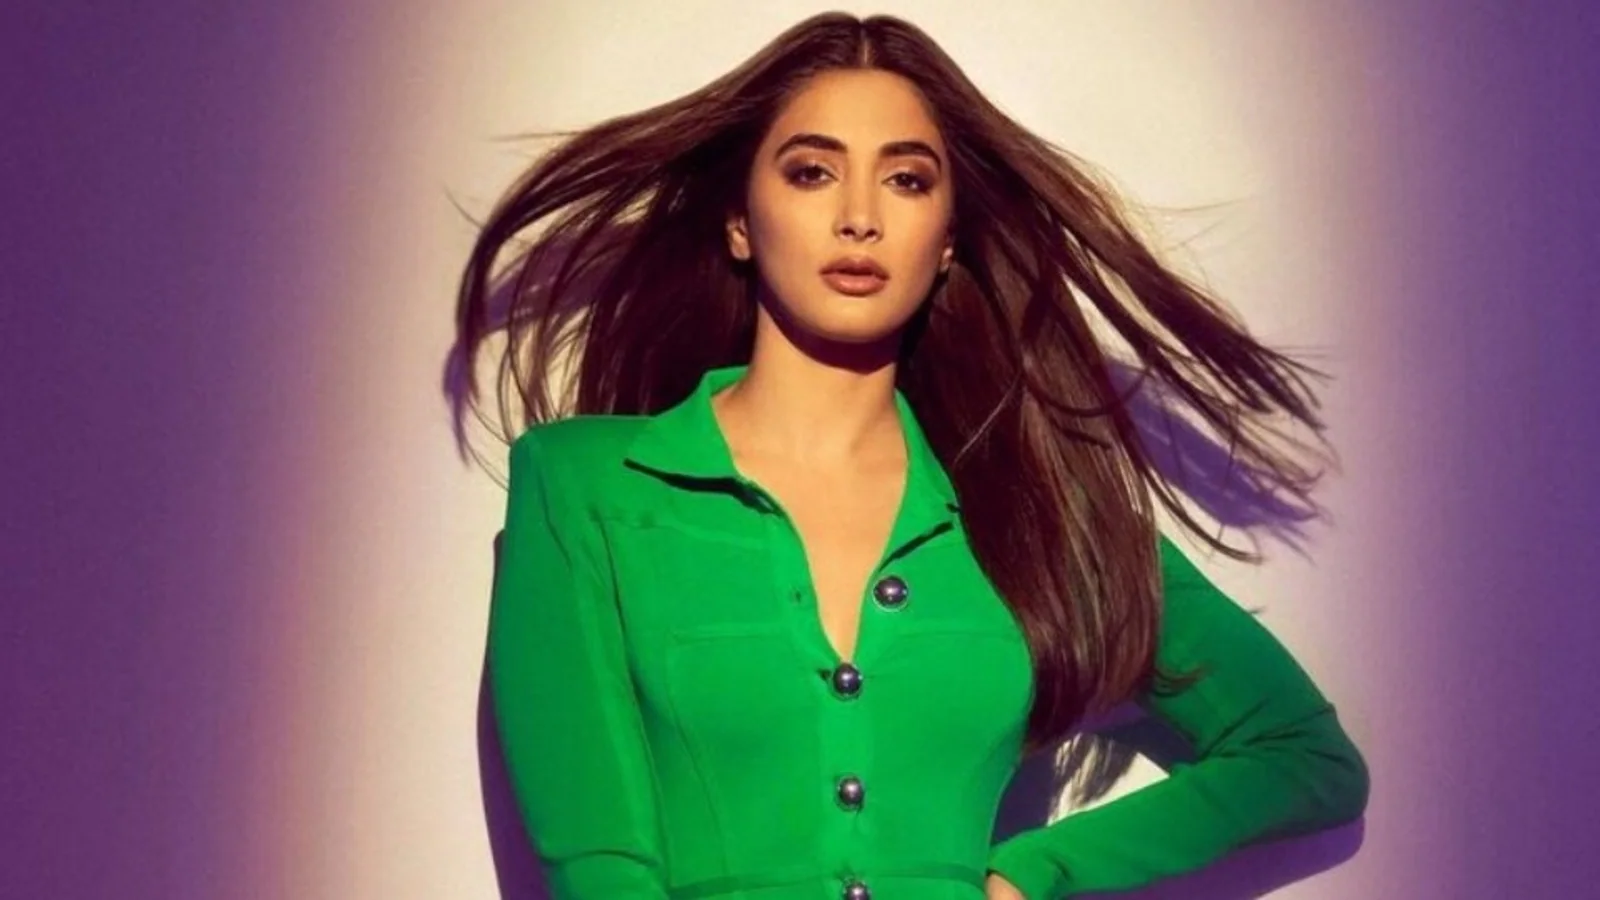 Pooja Hegde’s ‘Kacchi Kairi’ look in ₹27k figure-hugging dress will give you the summer feels: Check out pics